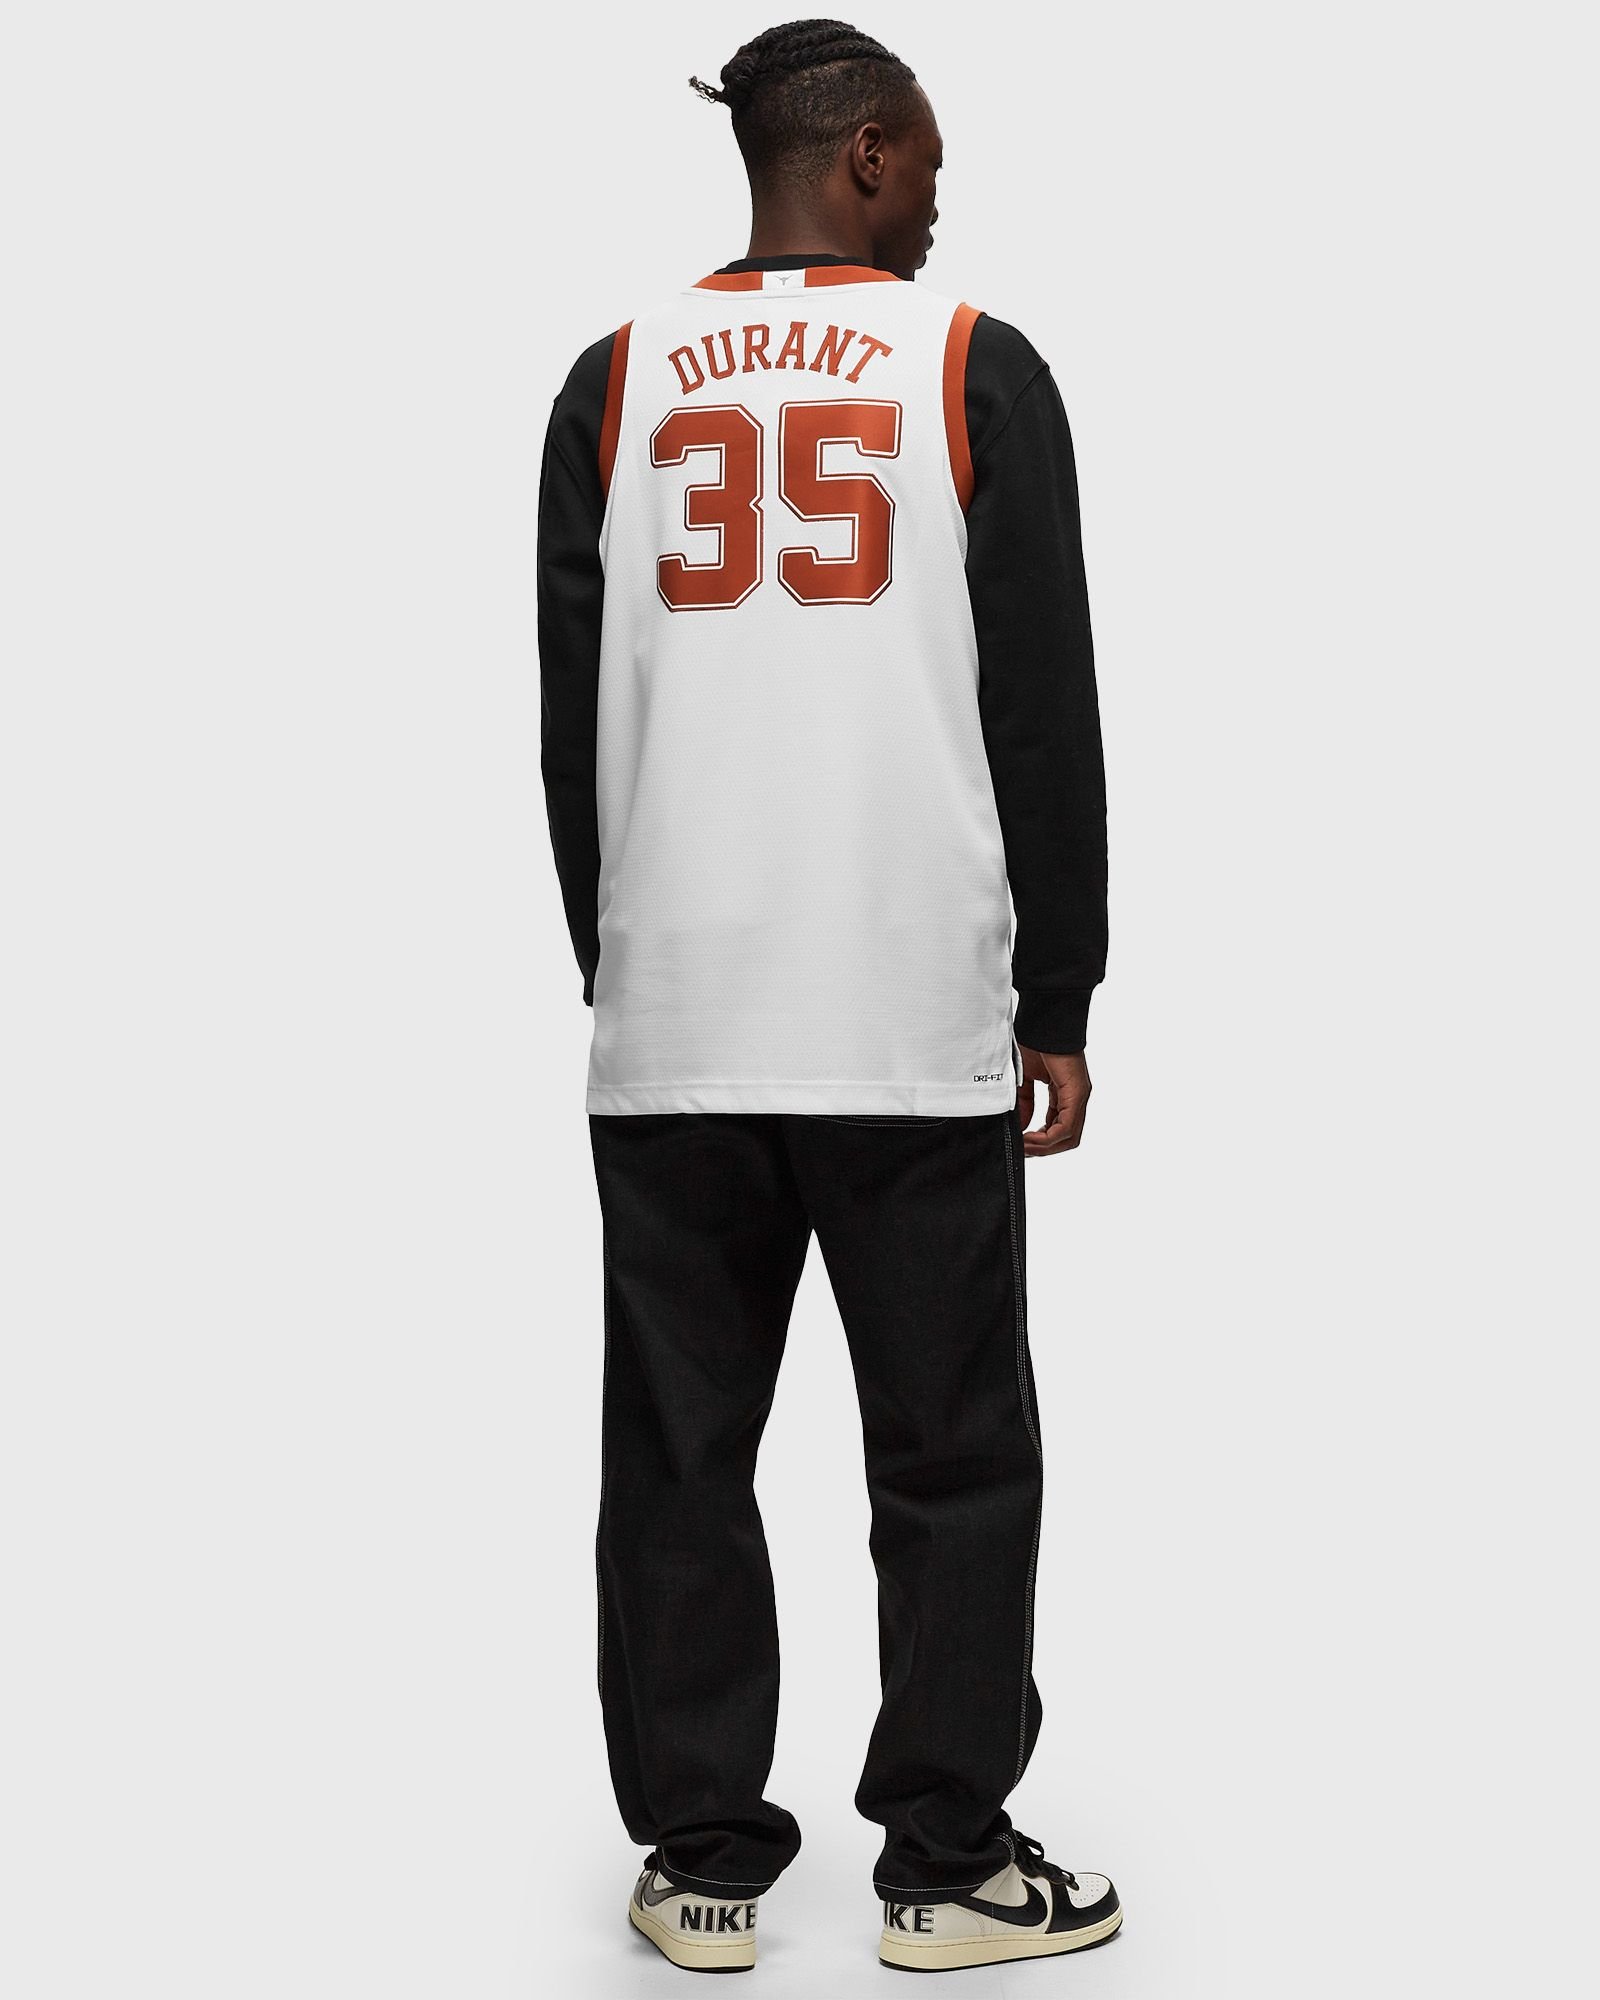 NCAA TEXAS LONGHORNS DRI-FIT LIMITED EDITION JERSEY KEVIN DURANT